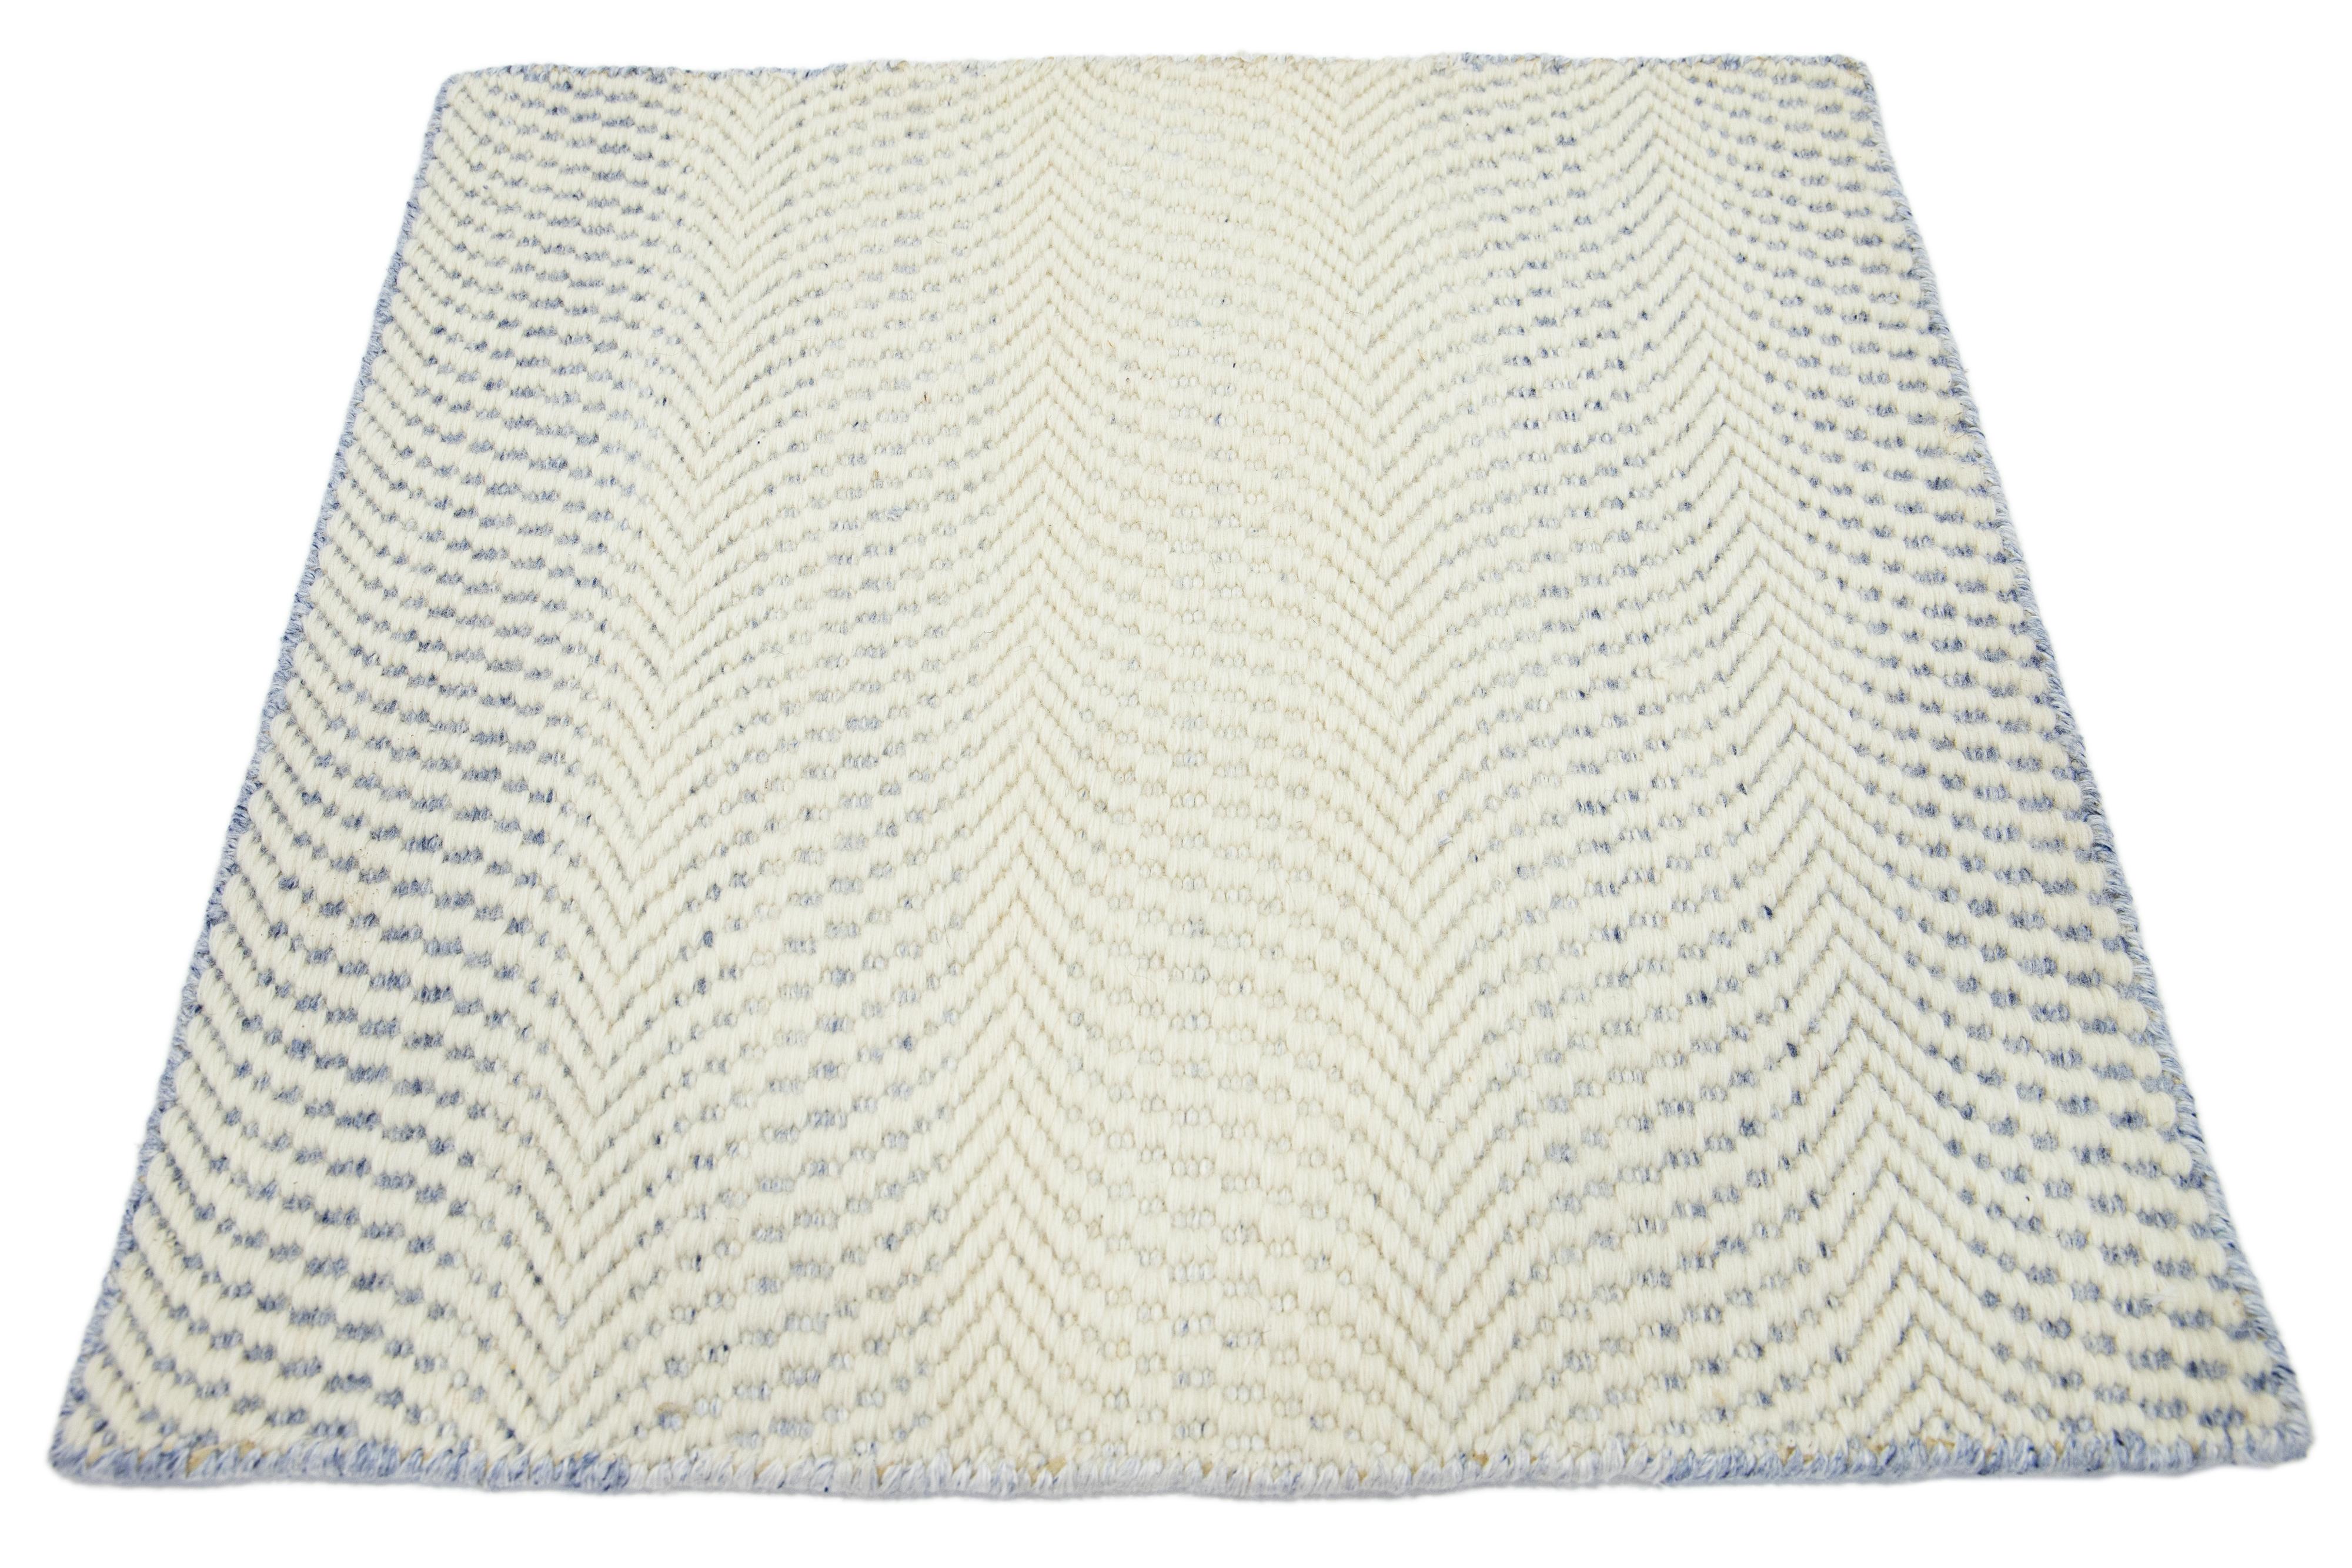 Apadana's Modern Moroccan style new Zealand wool custom rug. Custom sizes and colors made-to-order. 

Material: New Zealand wool 
Techniques: Hand-knotted
Style: Moroccan 
Lead time: Approx. 15-16 wks available 
Colors: As shown, other custom